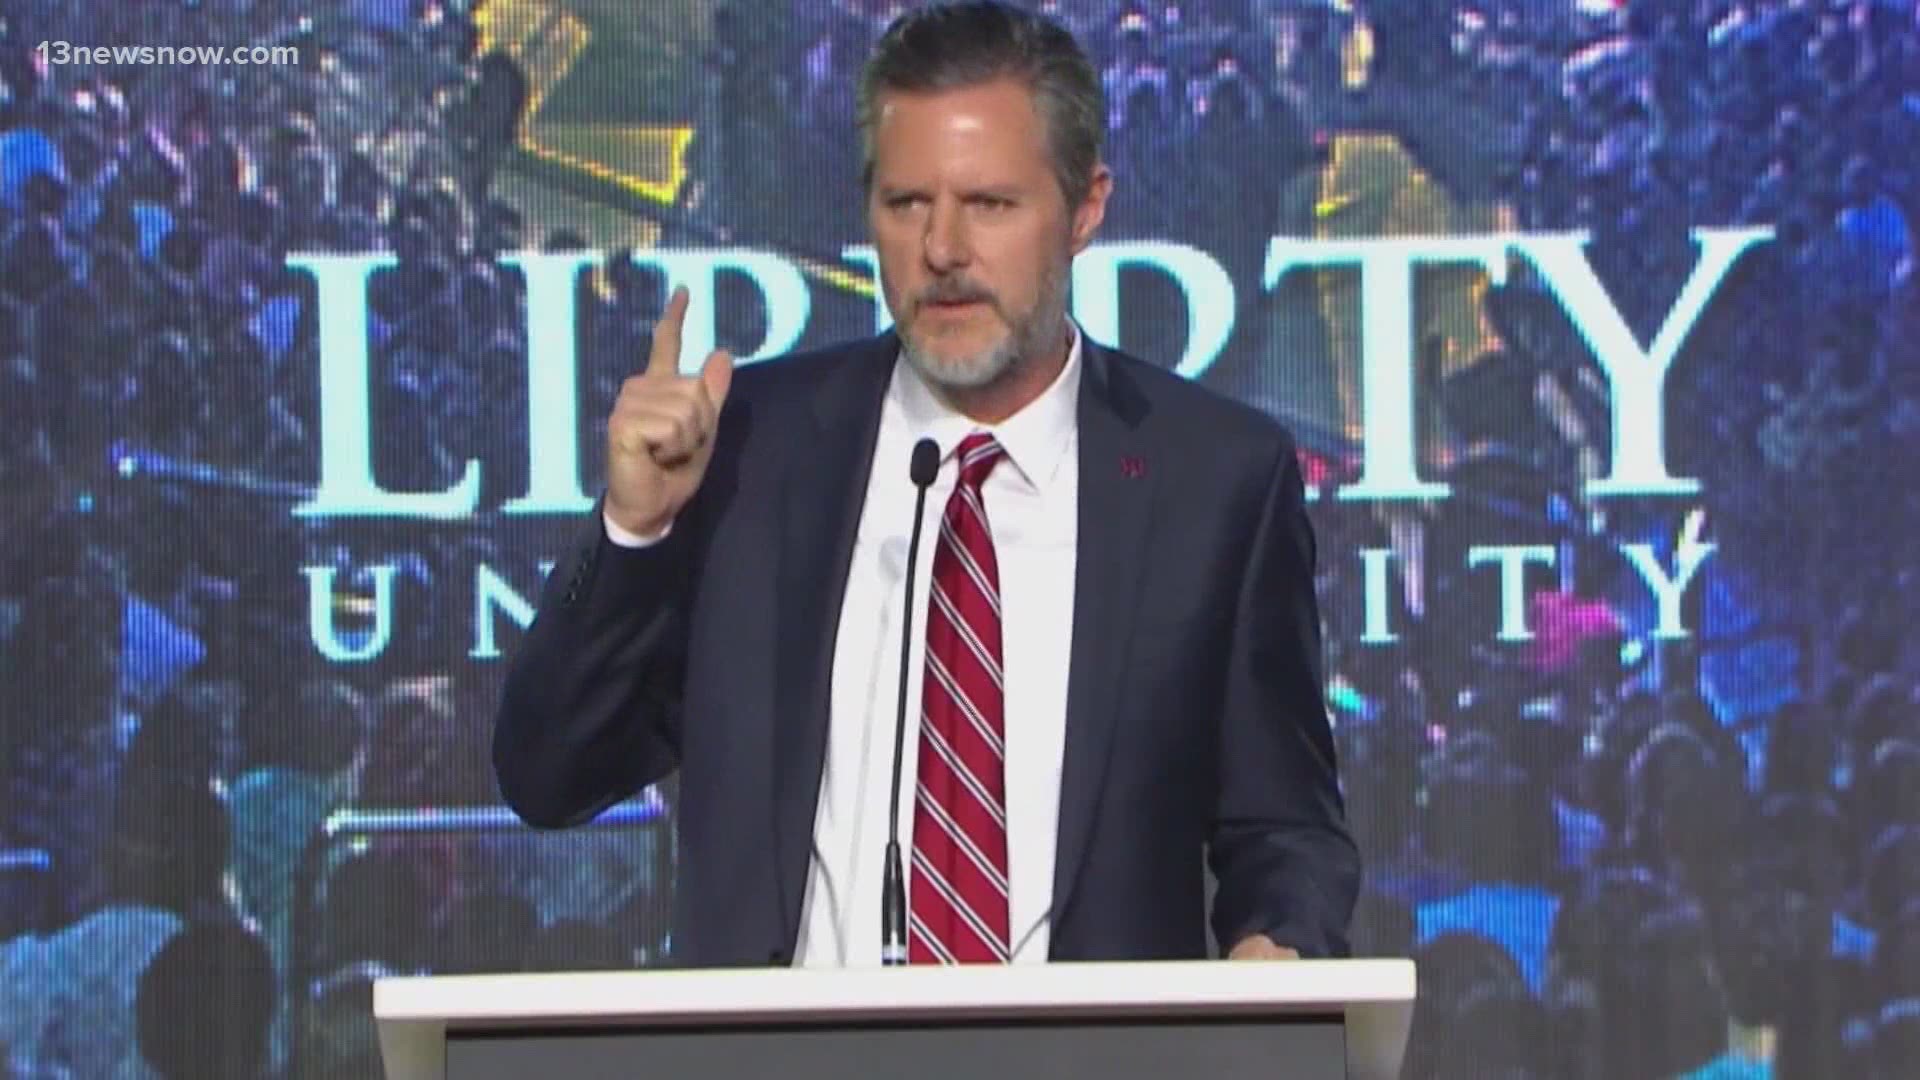 A one-sentence statement from the private Virginia university Jerry Falwell Jr. agreed to an indefinite leave of absence, "effective immediately."